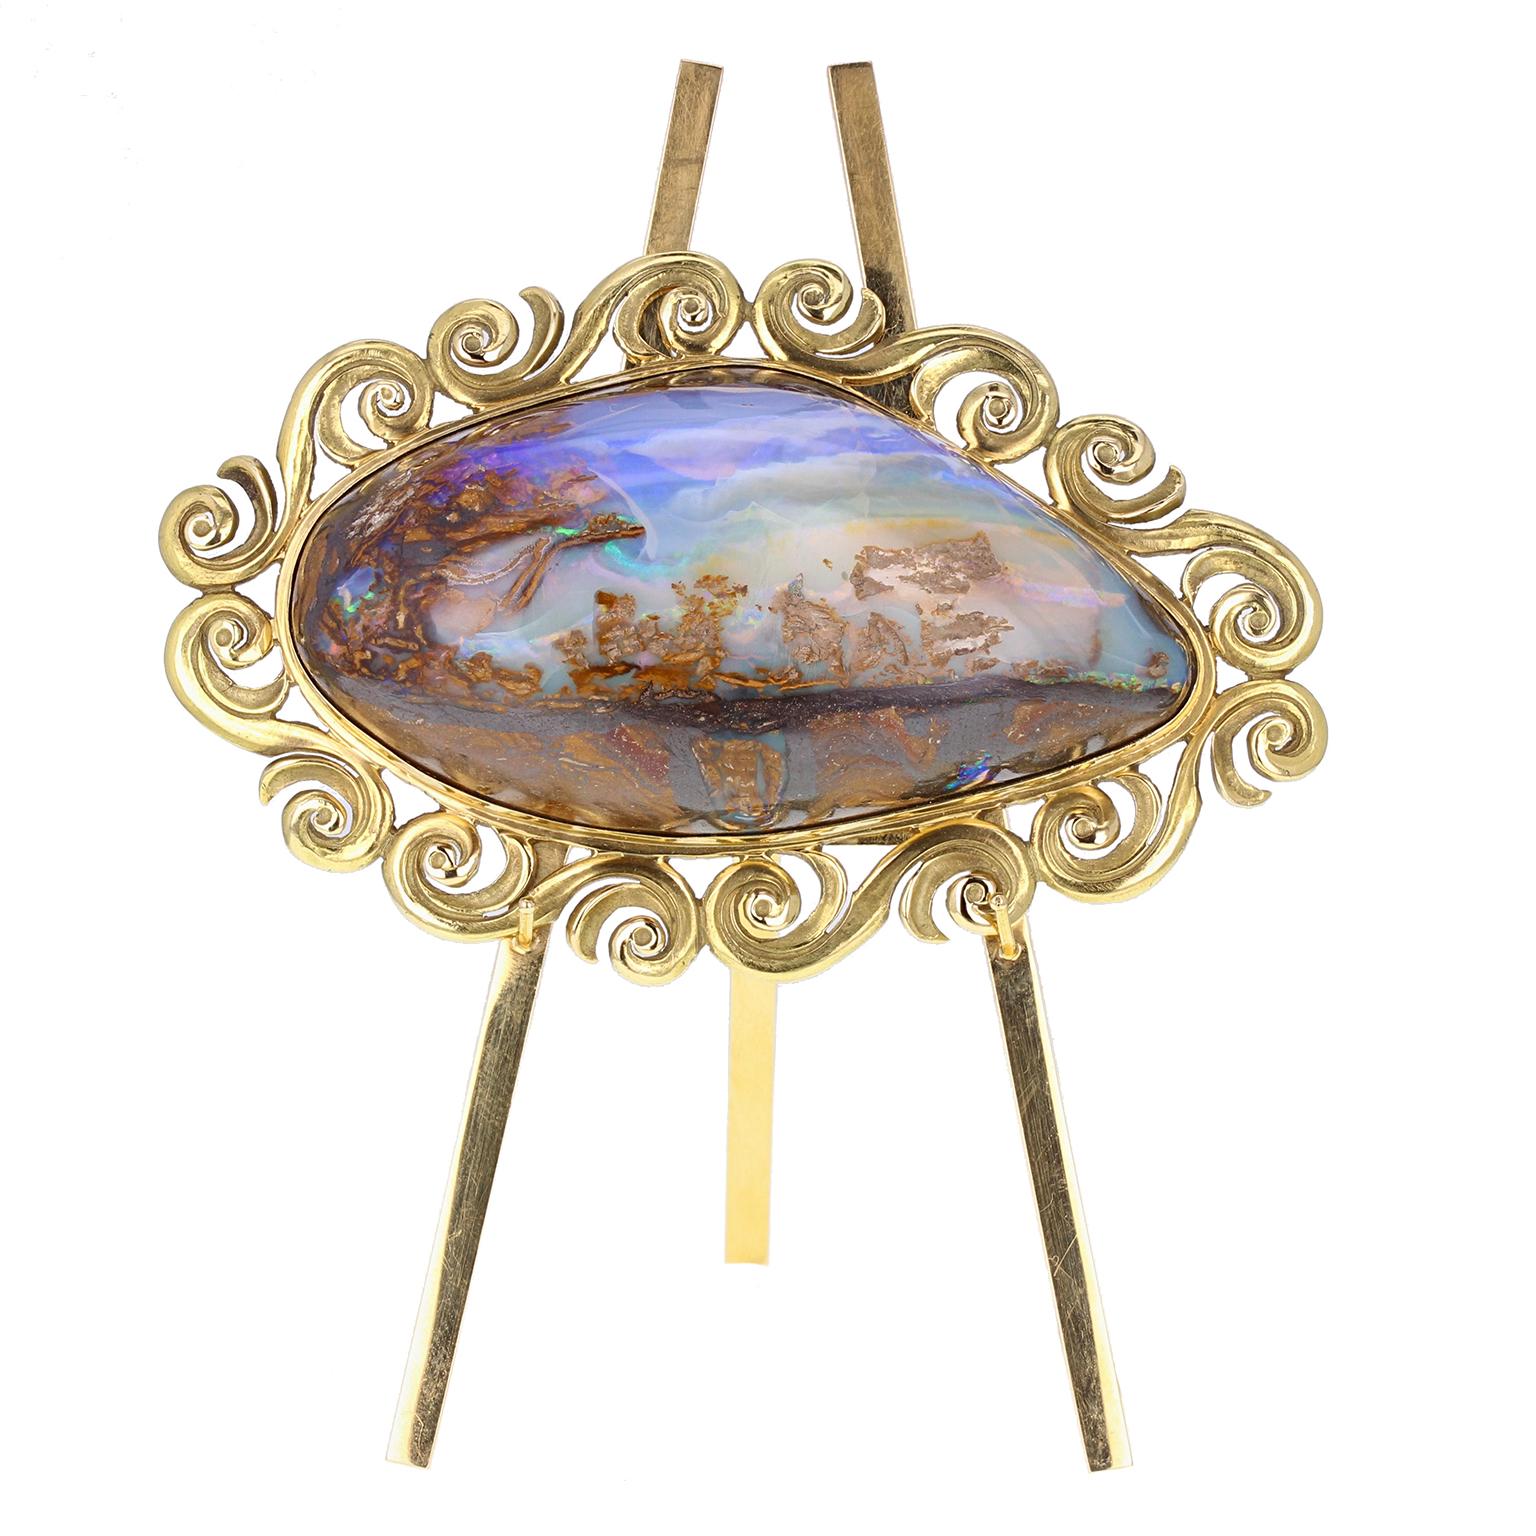 18 Carat Gold Mounted Boulder Opal Specimen with 18 Carat Gold Easel Stand In Excellent Condition For Sale In Newcastle Upon Tyne, GB